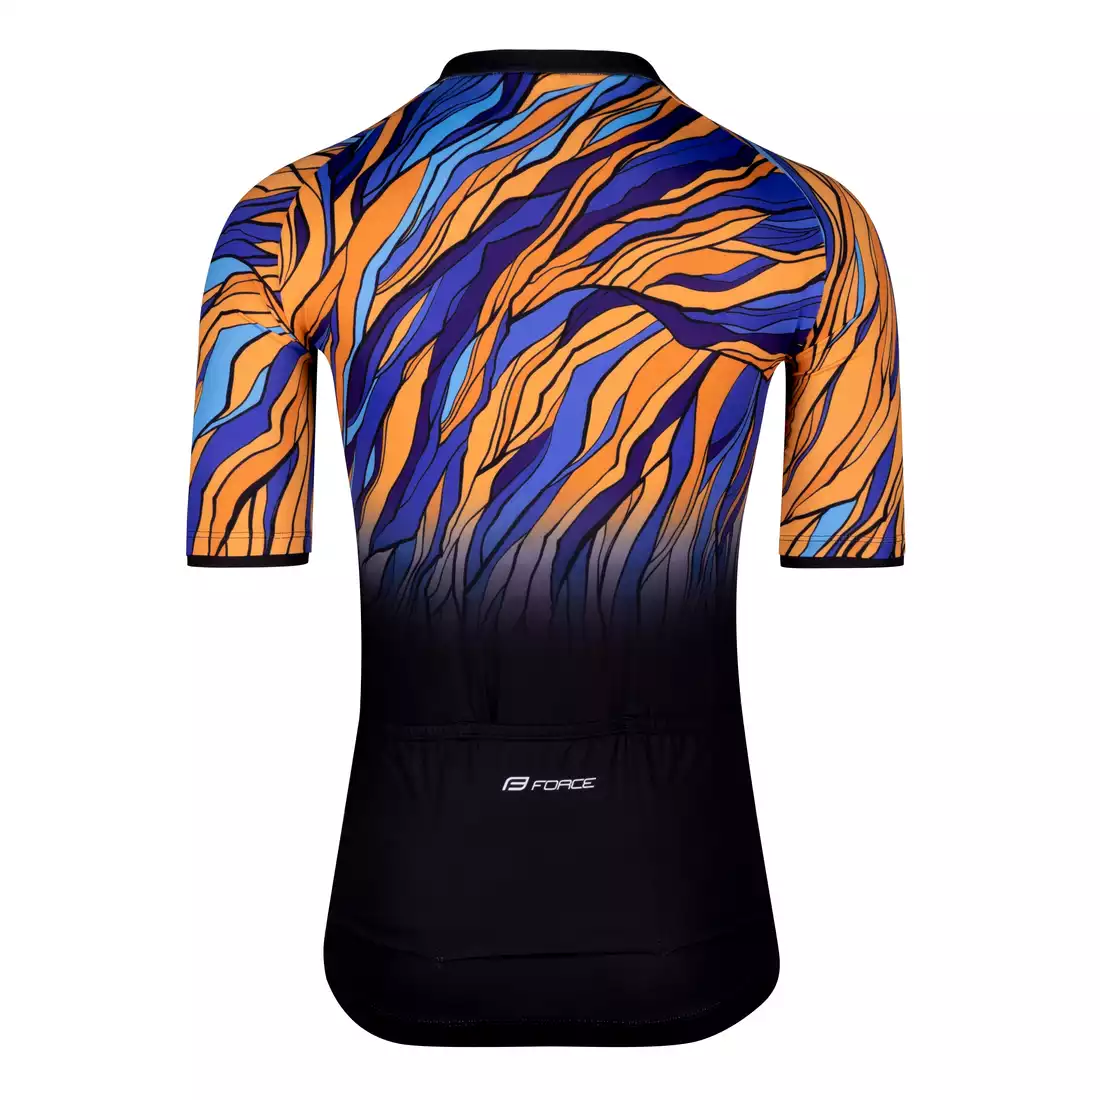 FORCE LIFE Men's cycling jersey, black, blue and orange